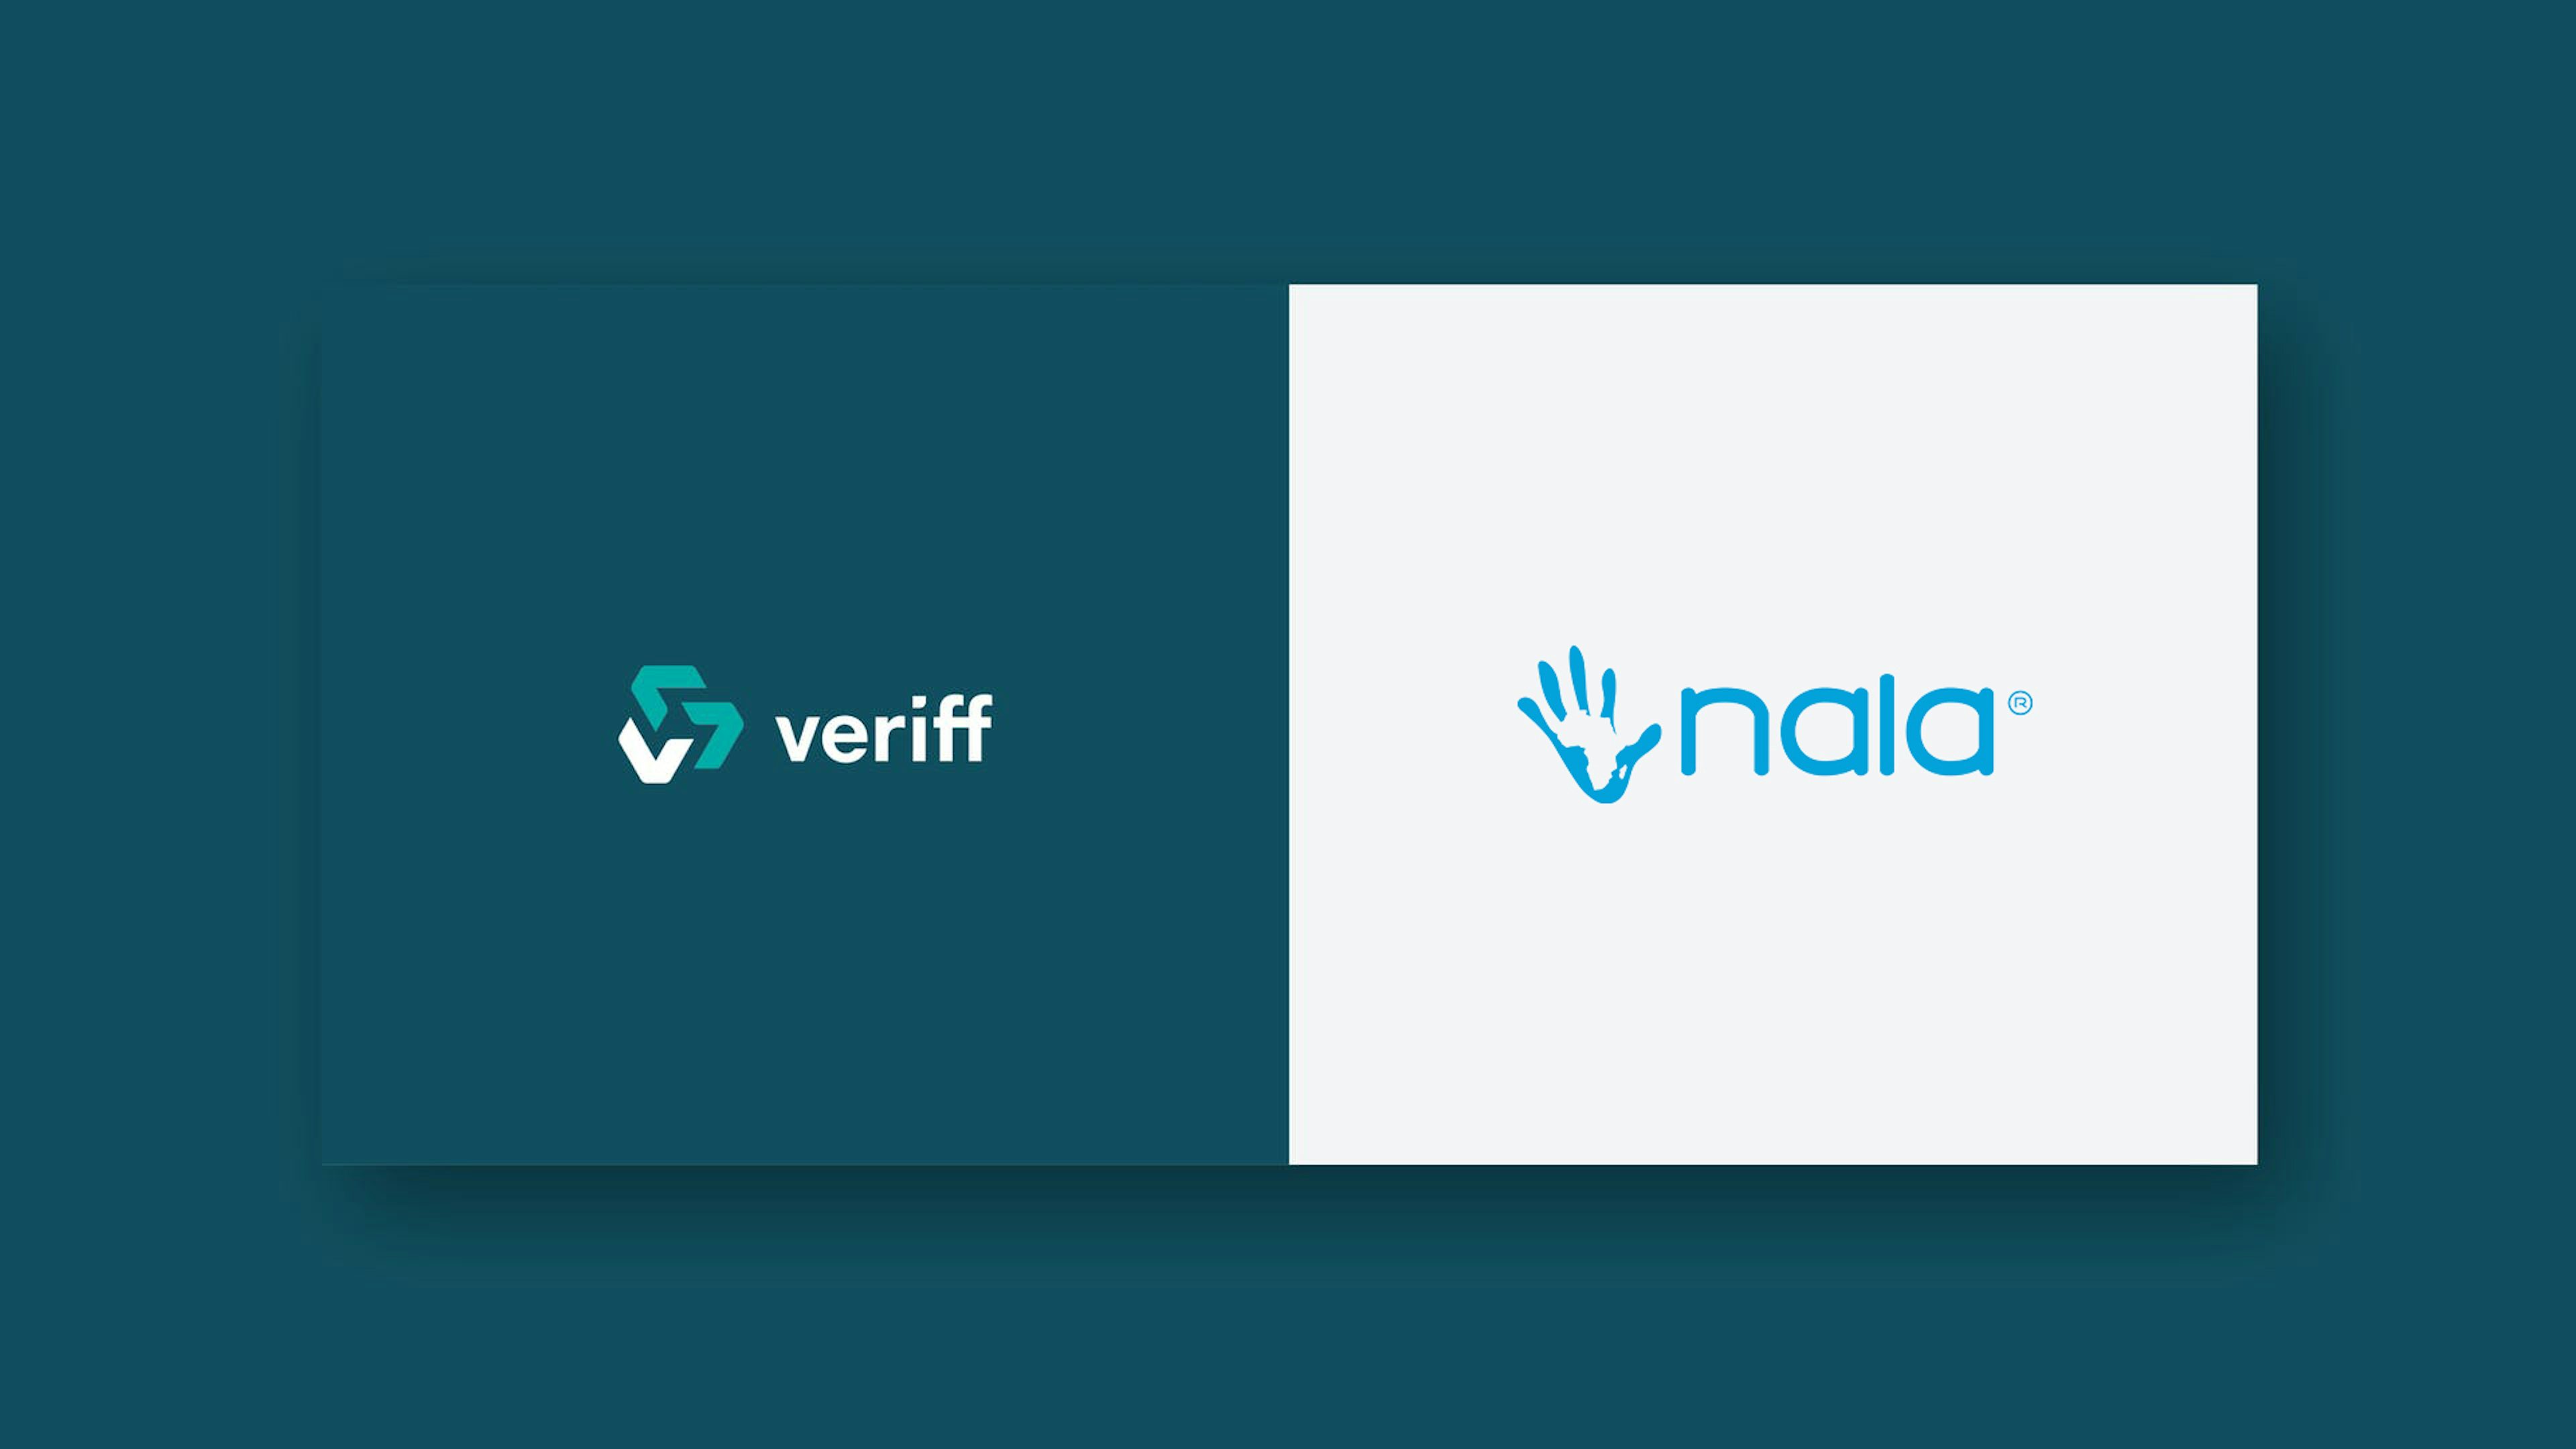 NALA takes their service to another level with Veriff for identity verification